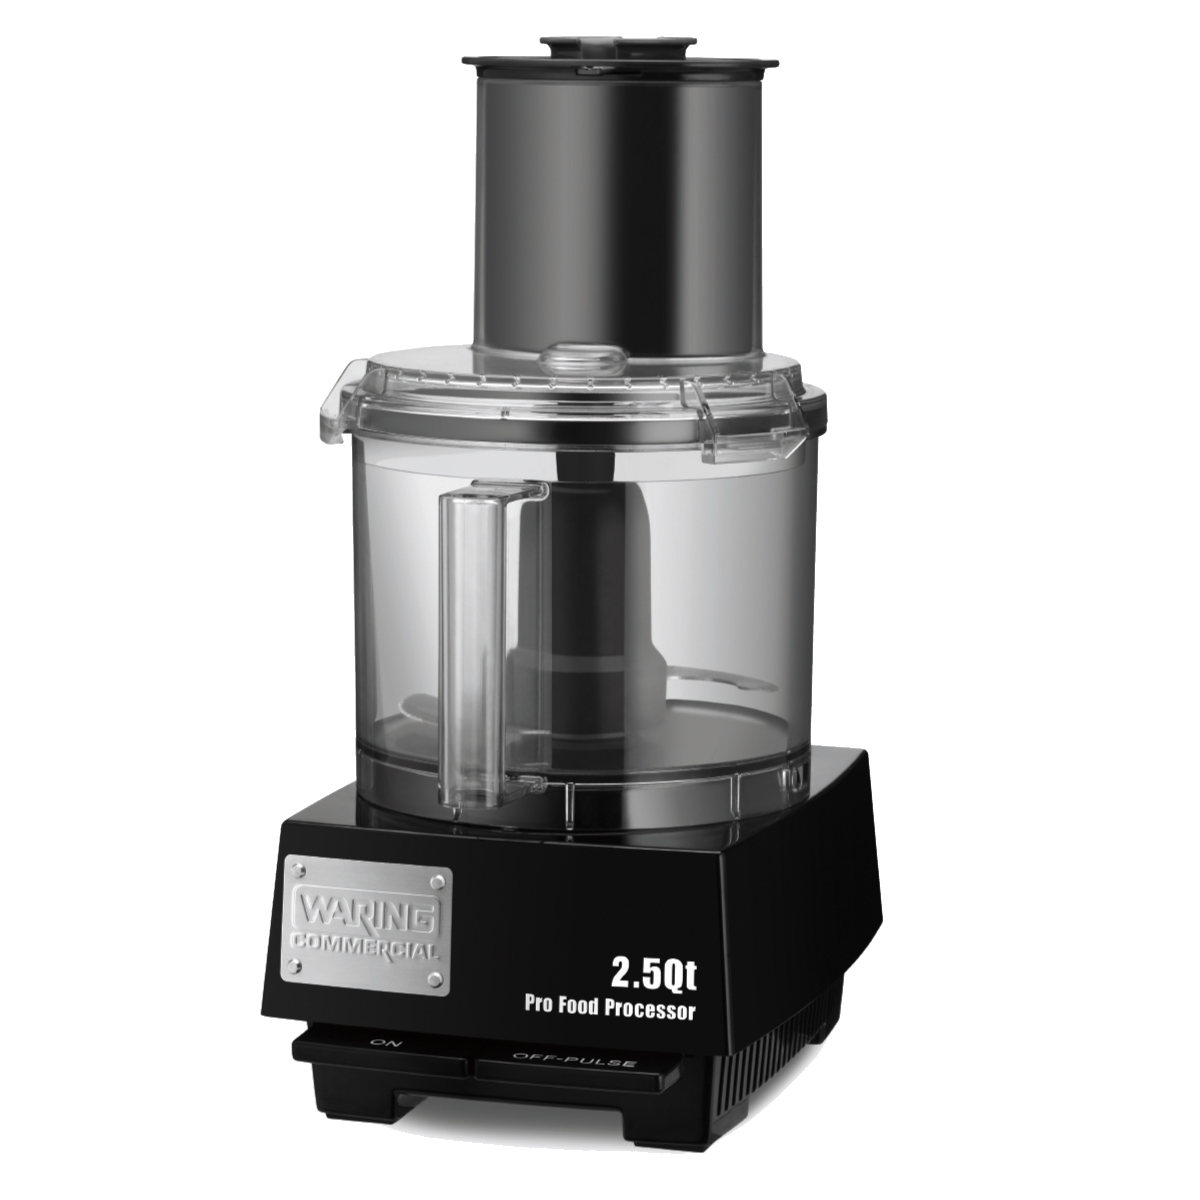 https://www.waringcommercialproducts.com/files/products/wfp11s-waring-food-processor-main.png